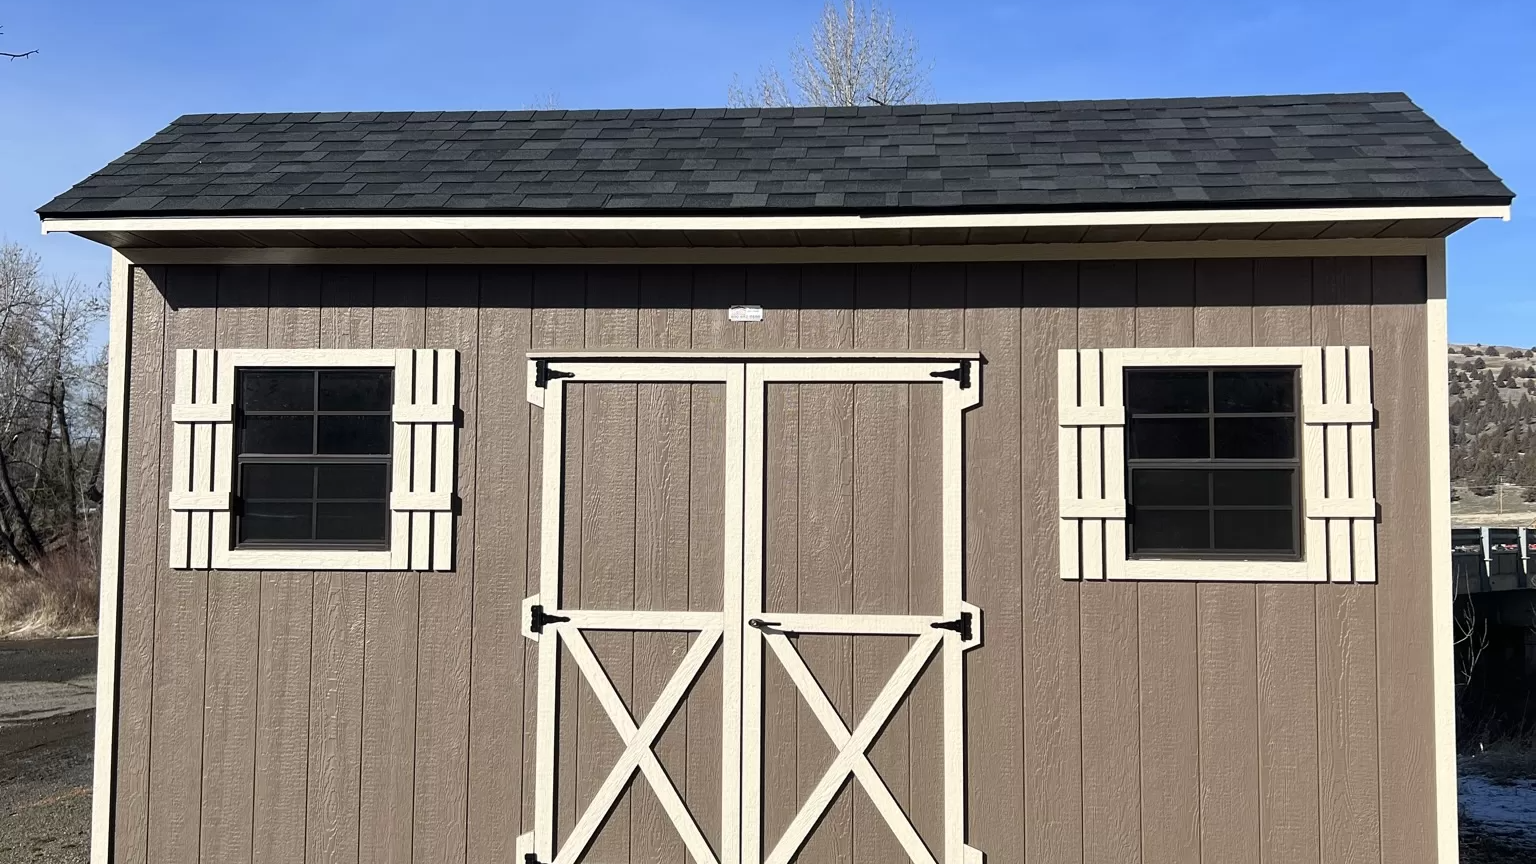 10x28 sheds for sale in oregon